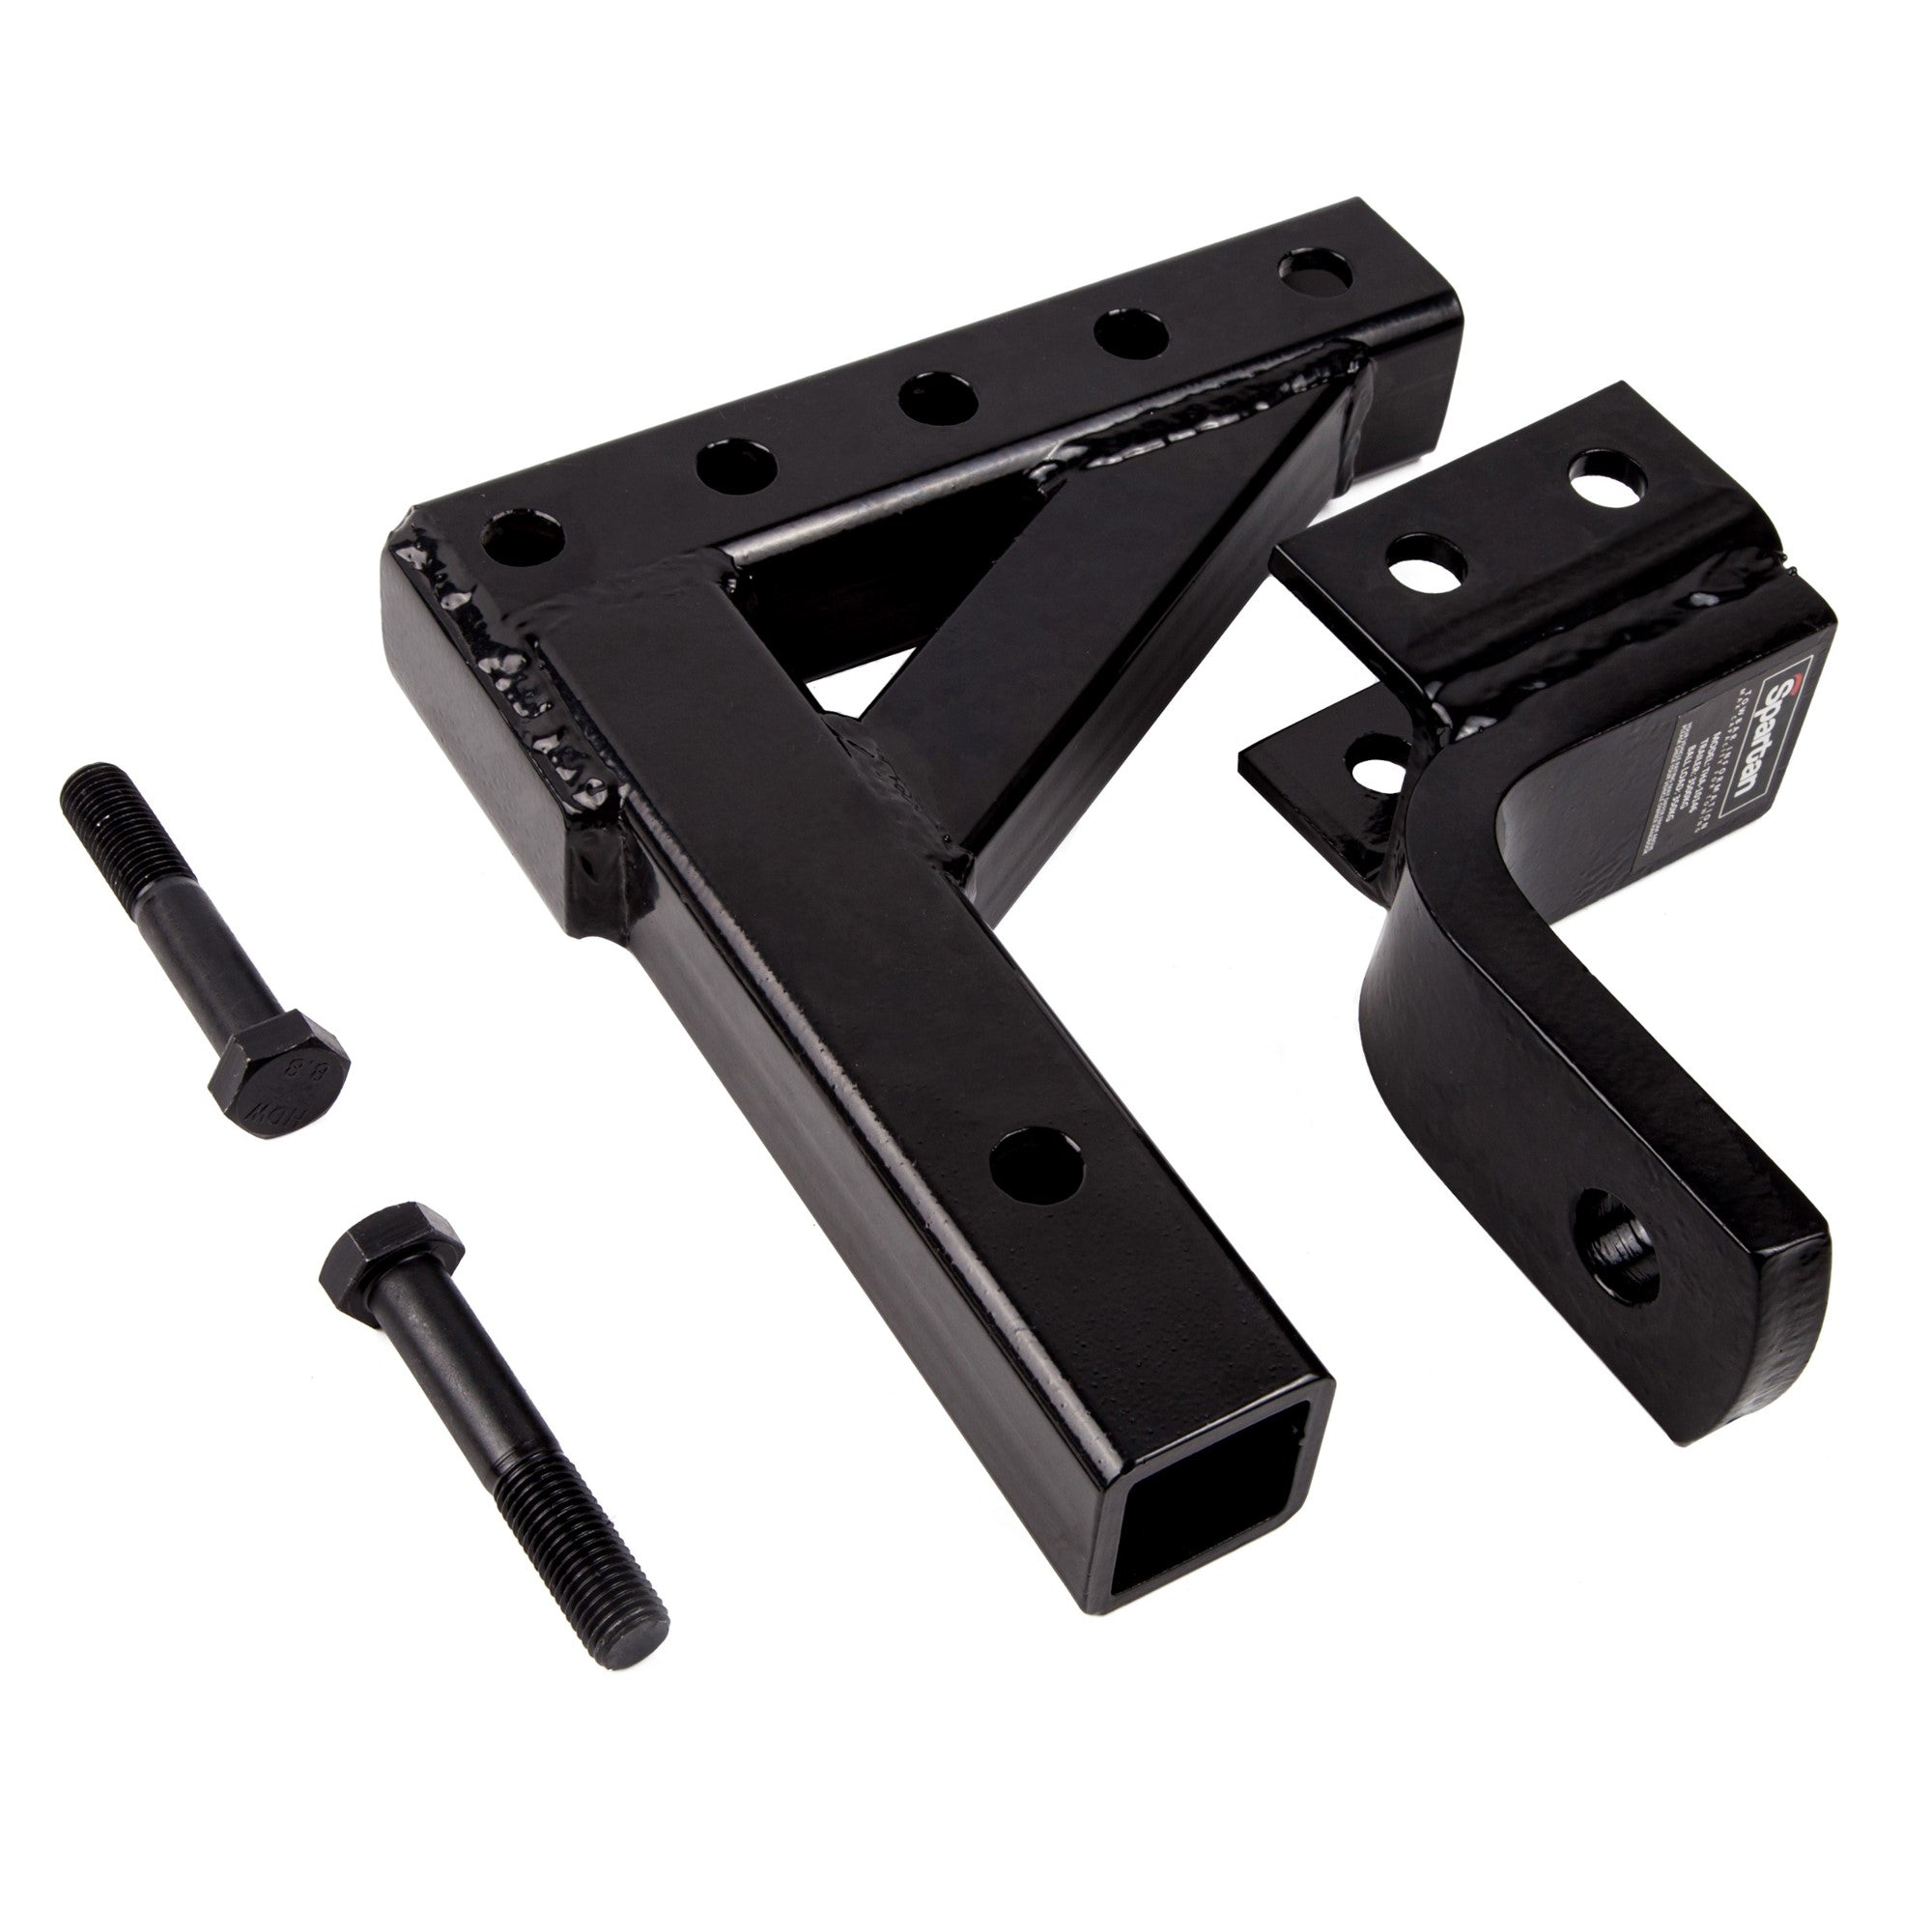 5 hole adjustable allows for level towing of your vehicle and trailer and is perfect for multiple vehicle owners